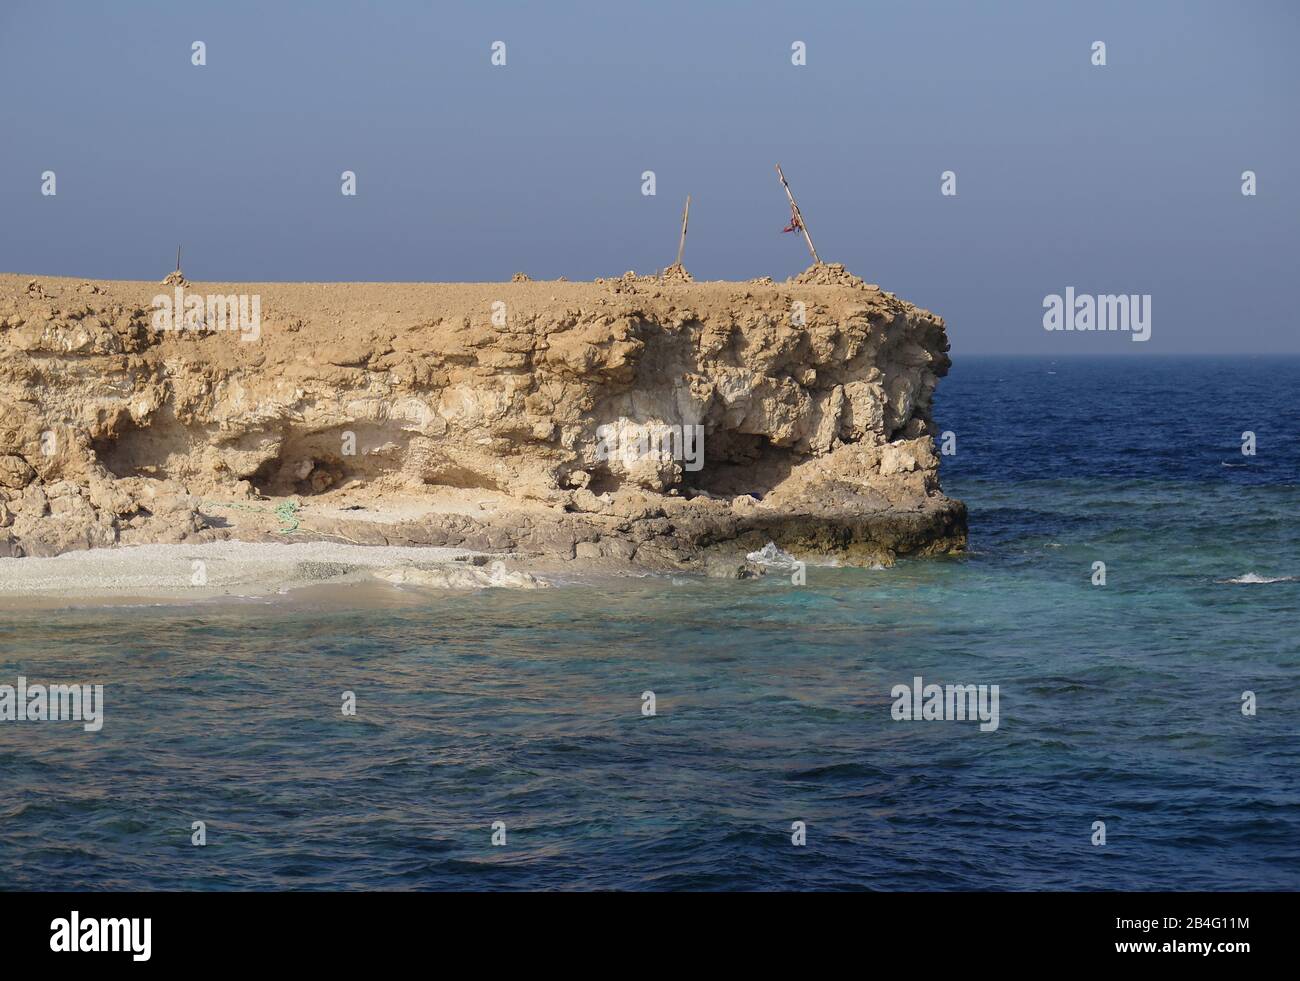 Insel, Little Bother, Brother Islands, Rotes Meer, Aegypten / Ägypten Stock Photo